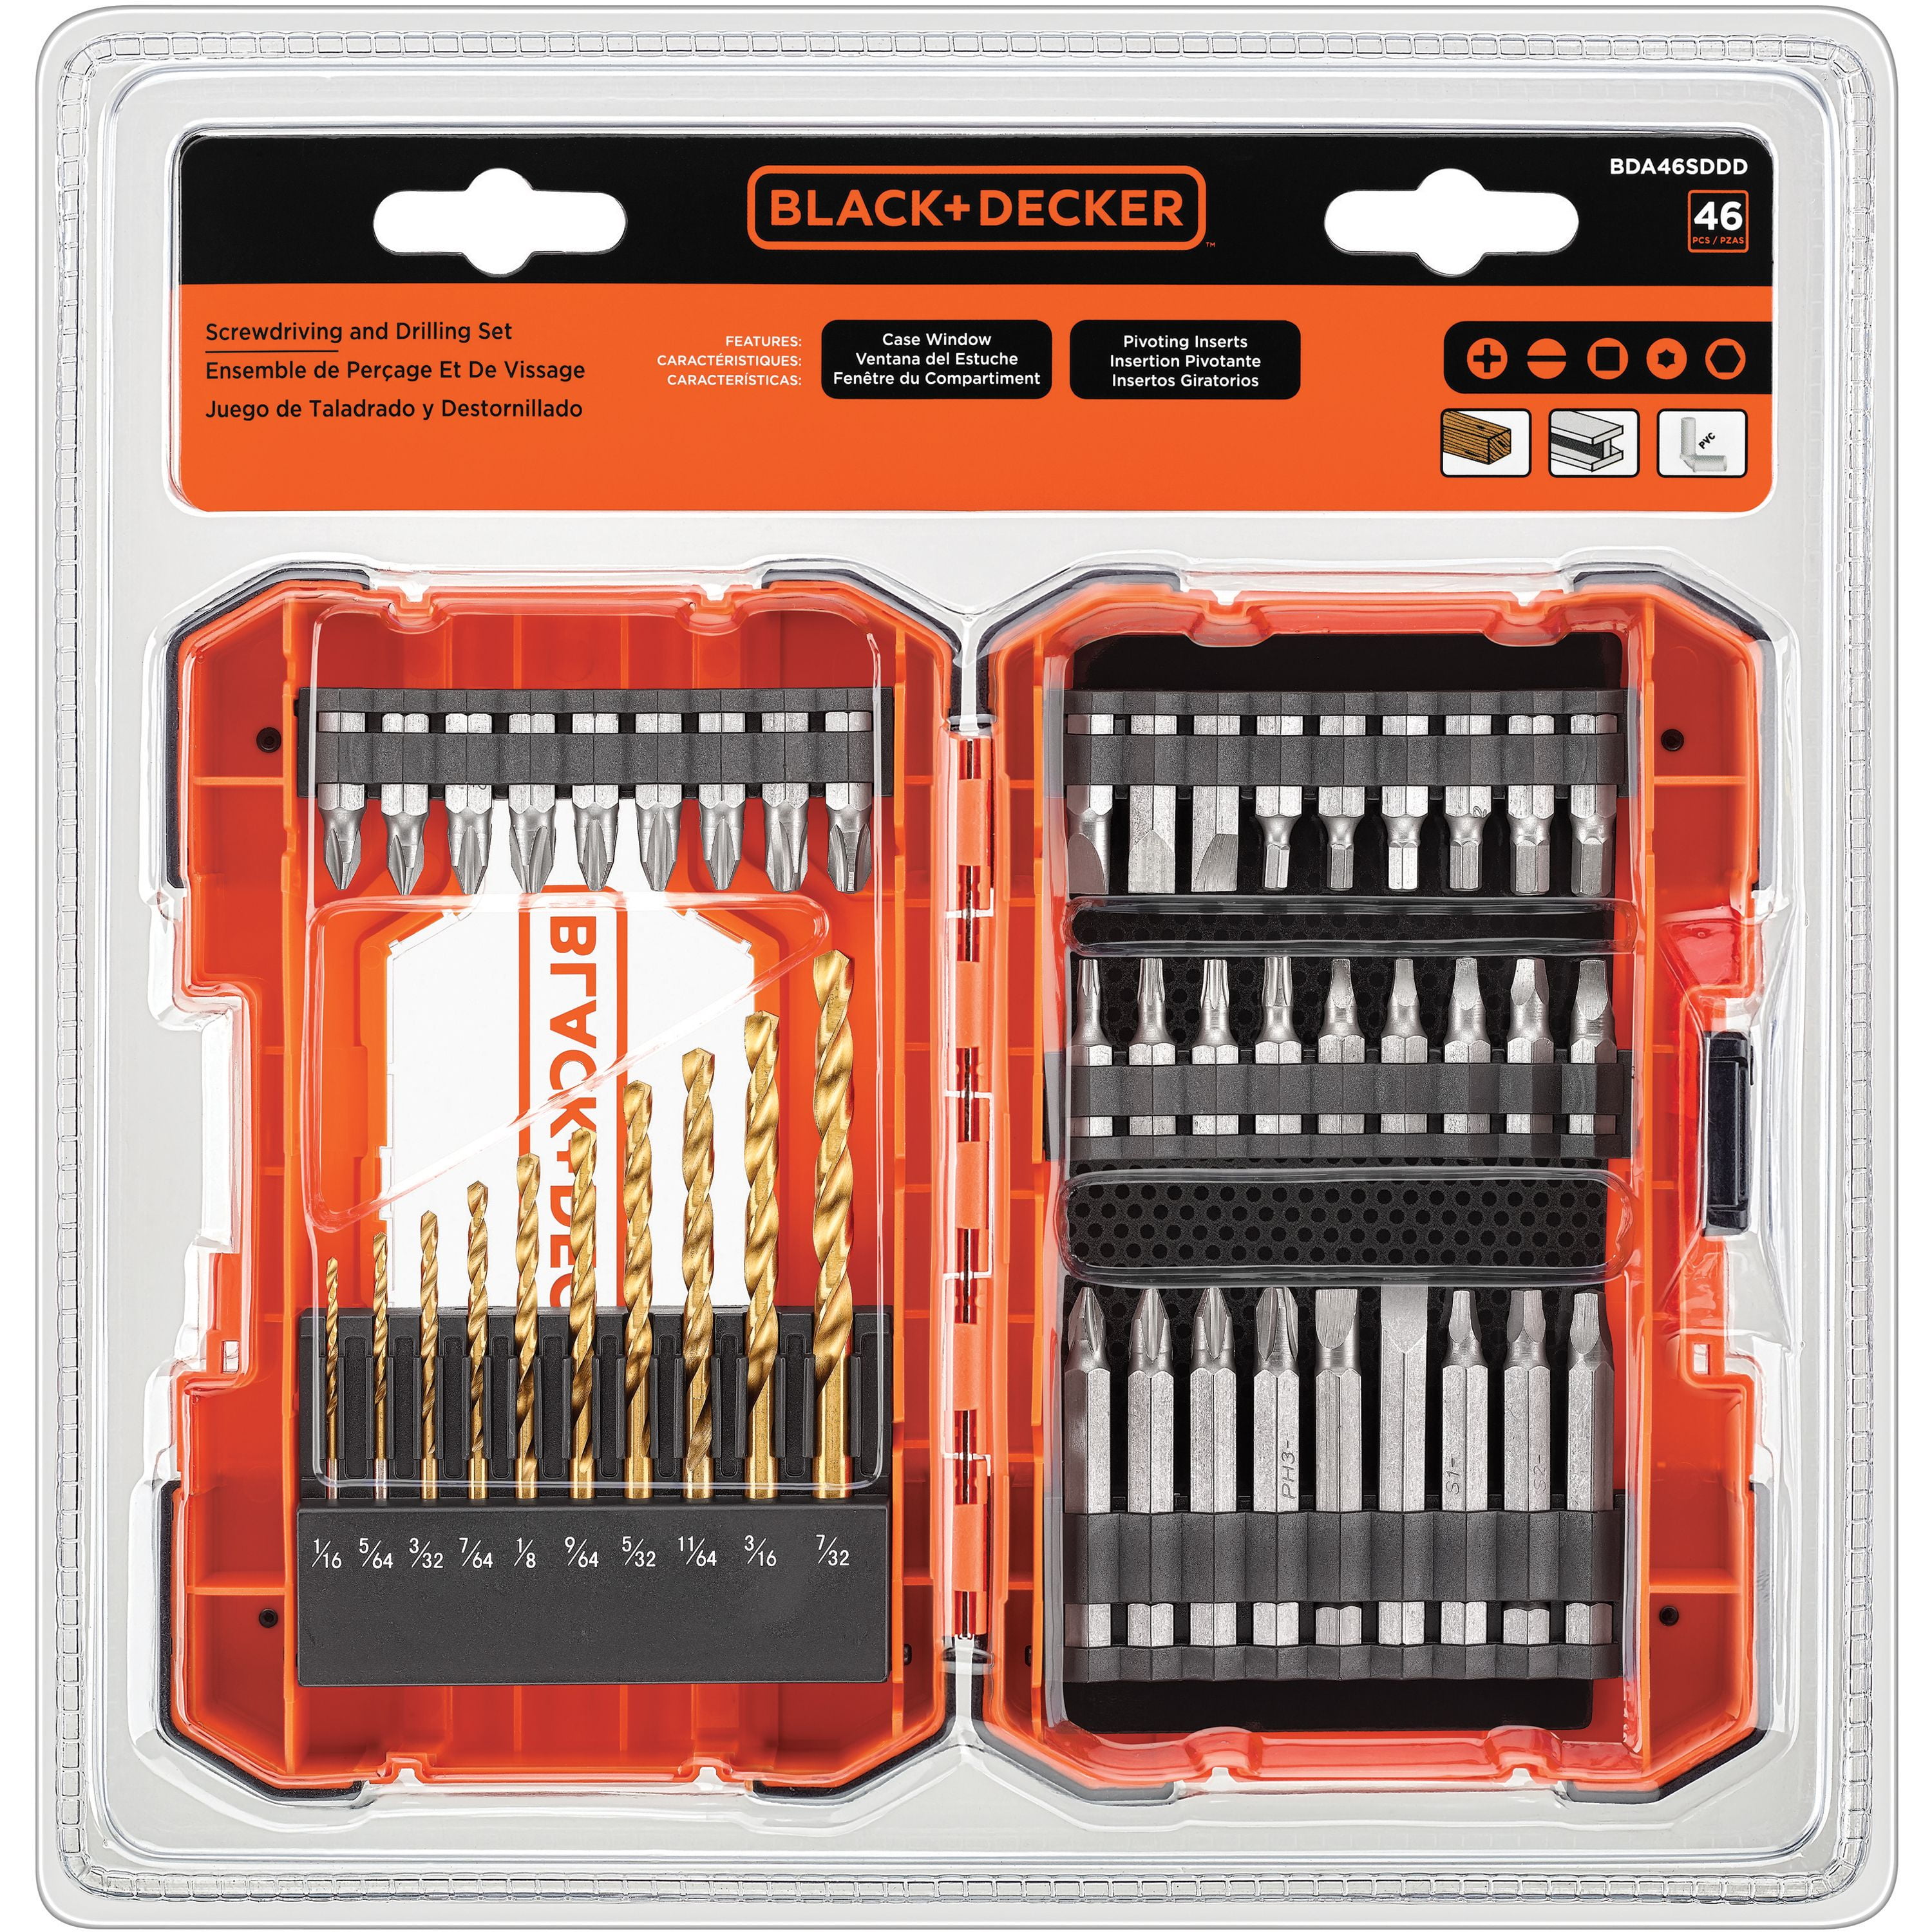 BLACK+DECKER Drilling and Driving Complete Home Essentials Set